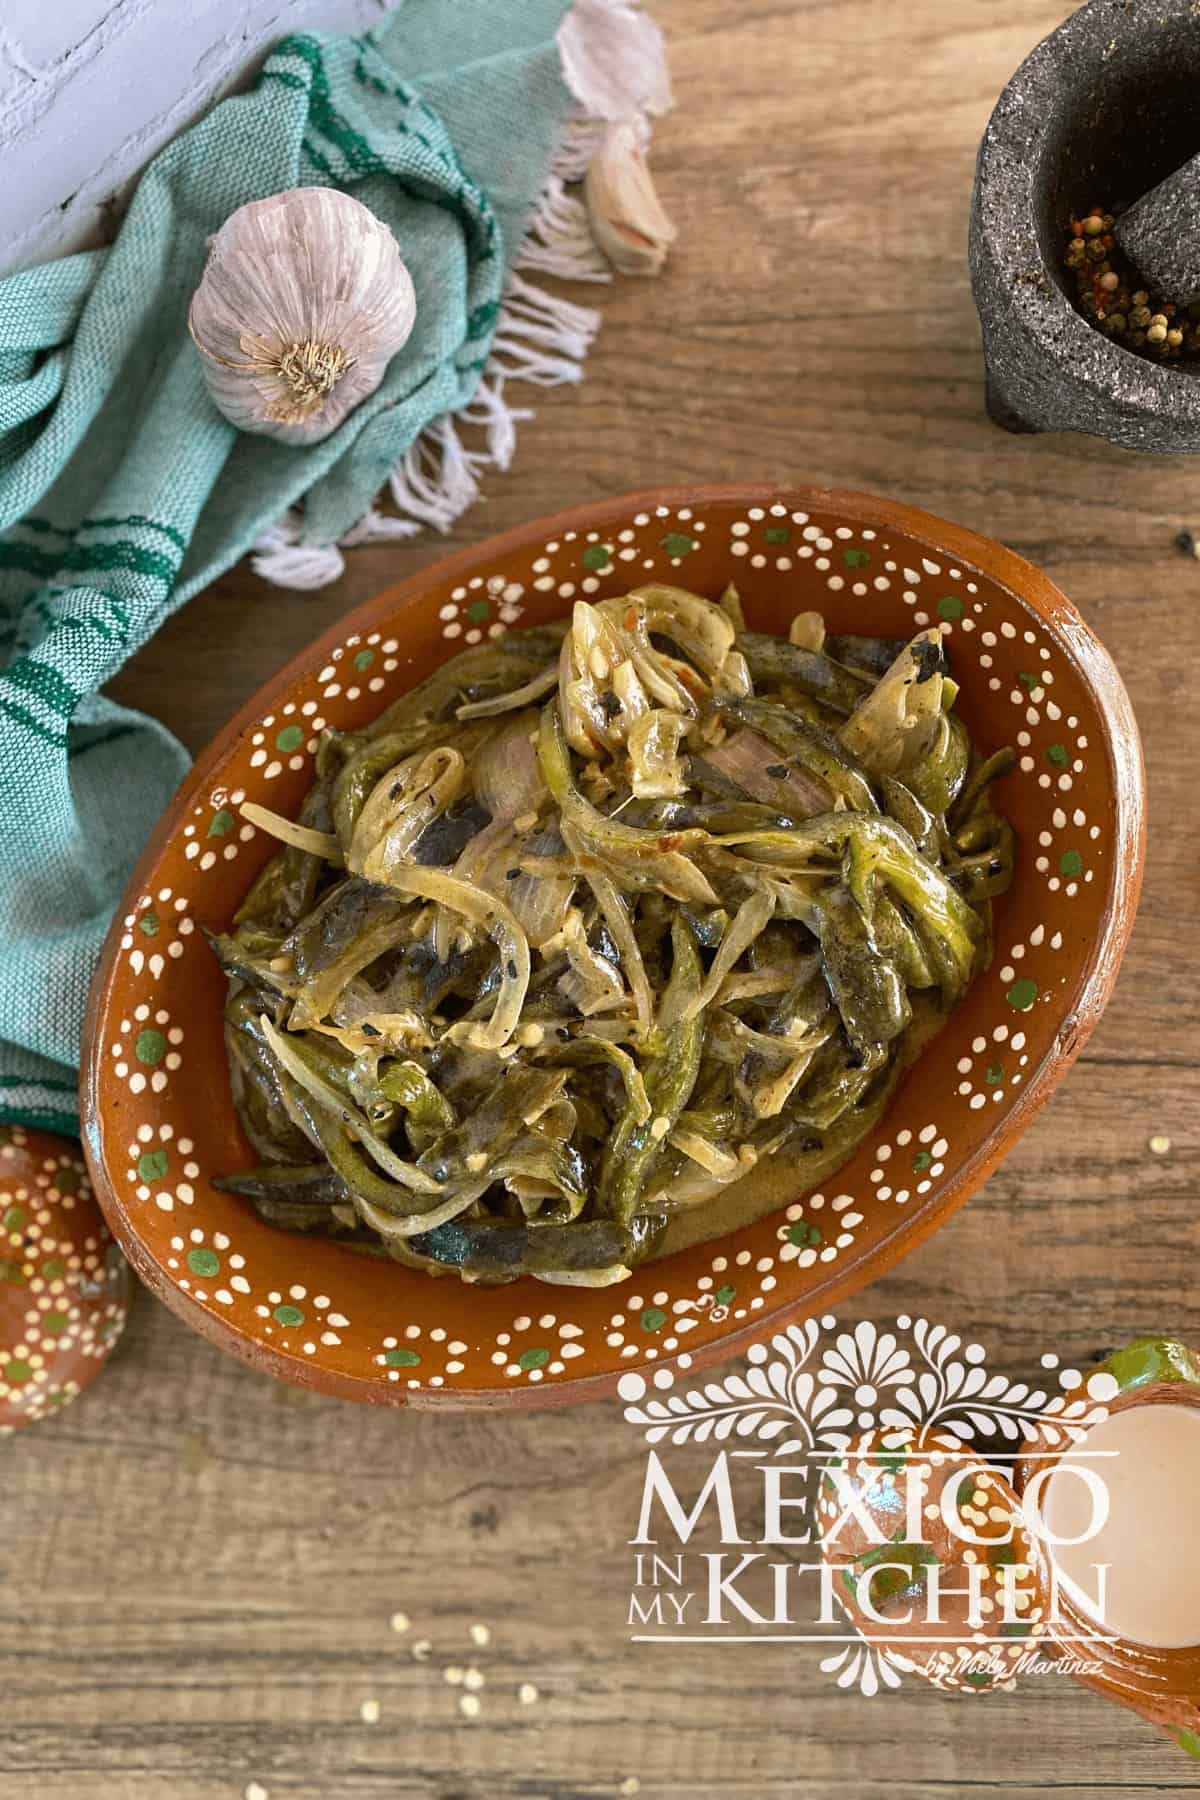 Mexican Rajas con Crema served on a platter